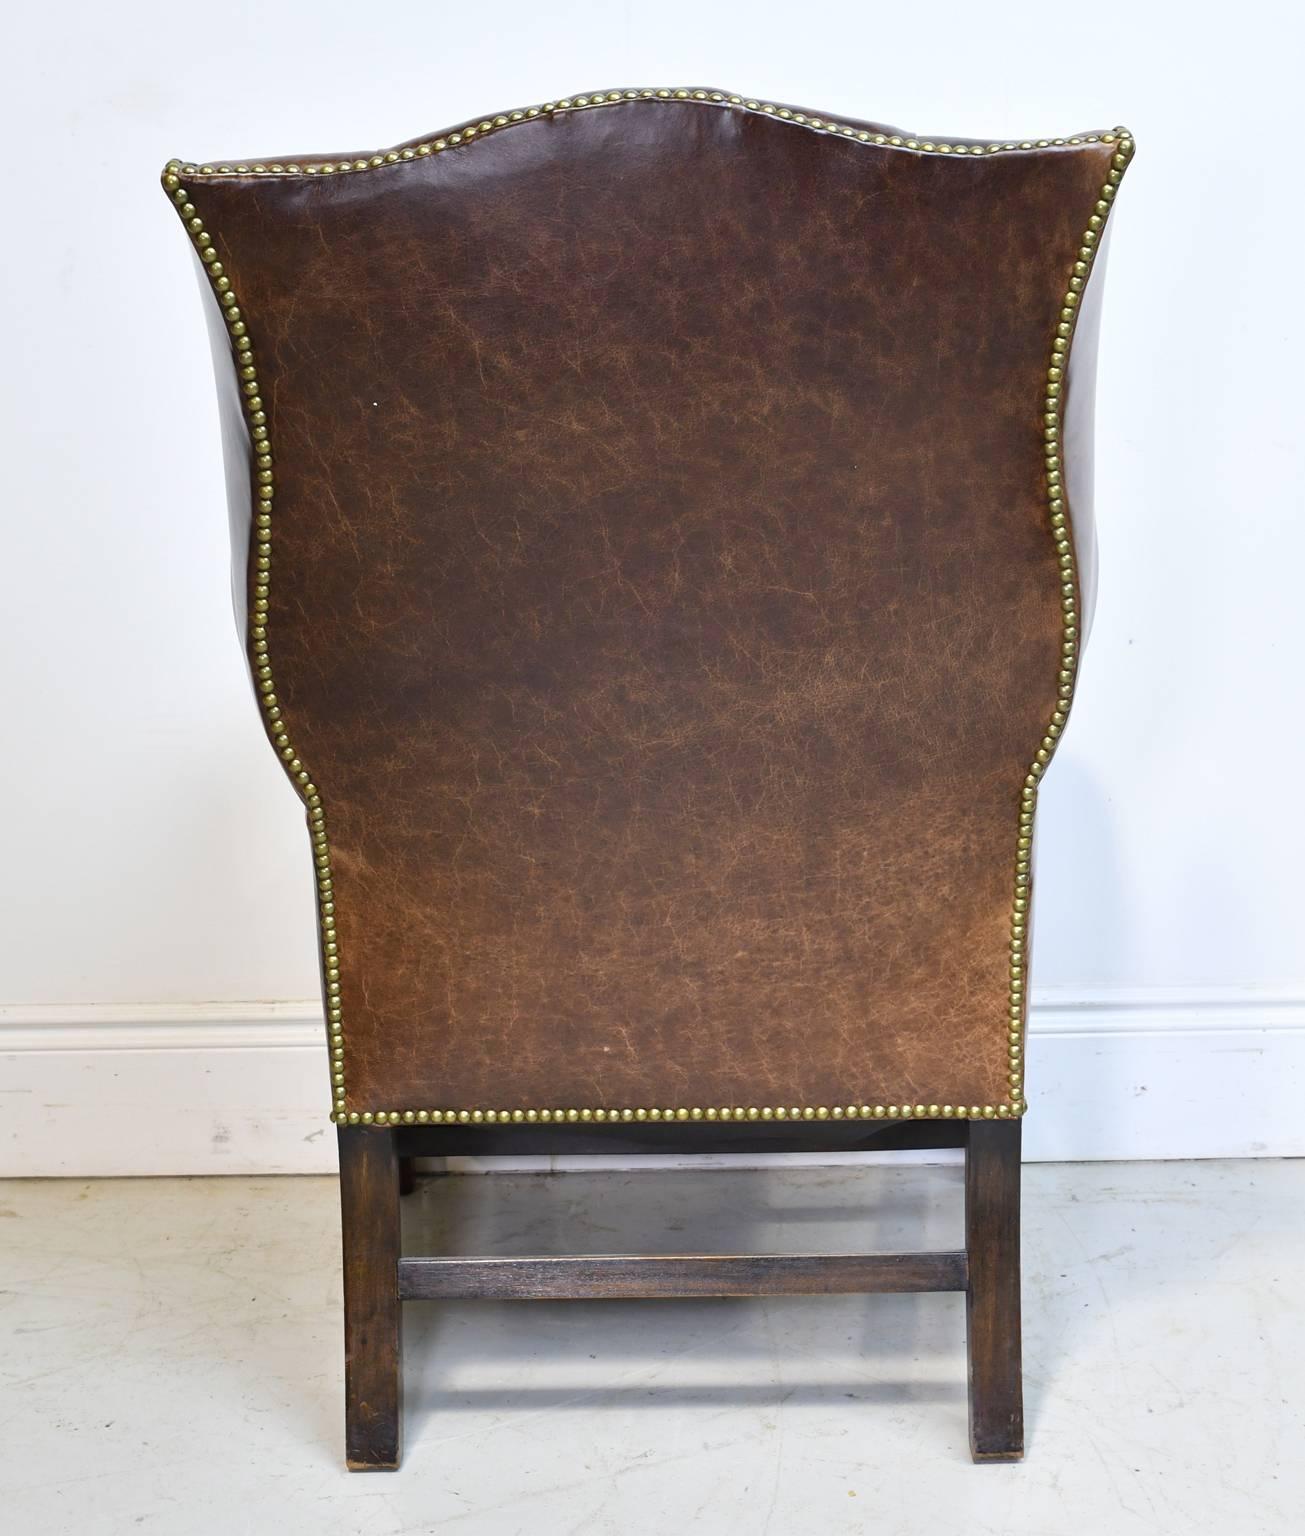 English Vintage Chesterfield Wing-Back Chair with Tufted Brown Leather 